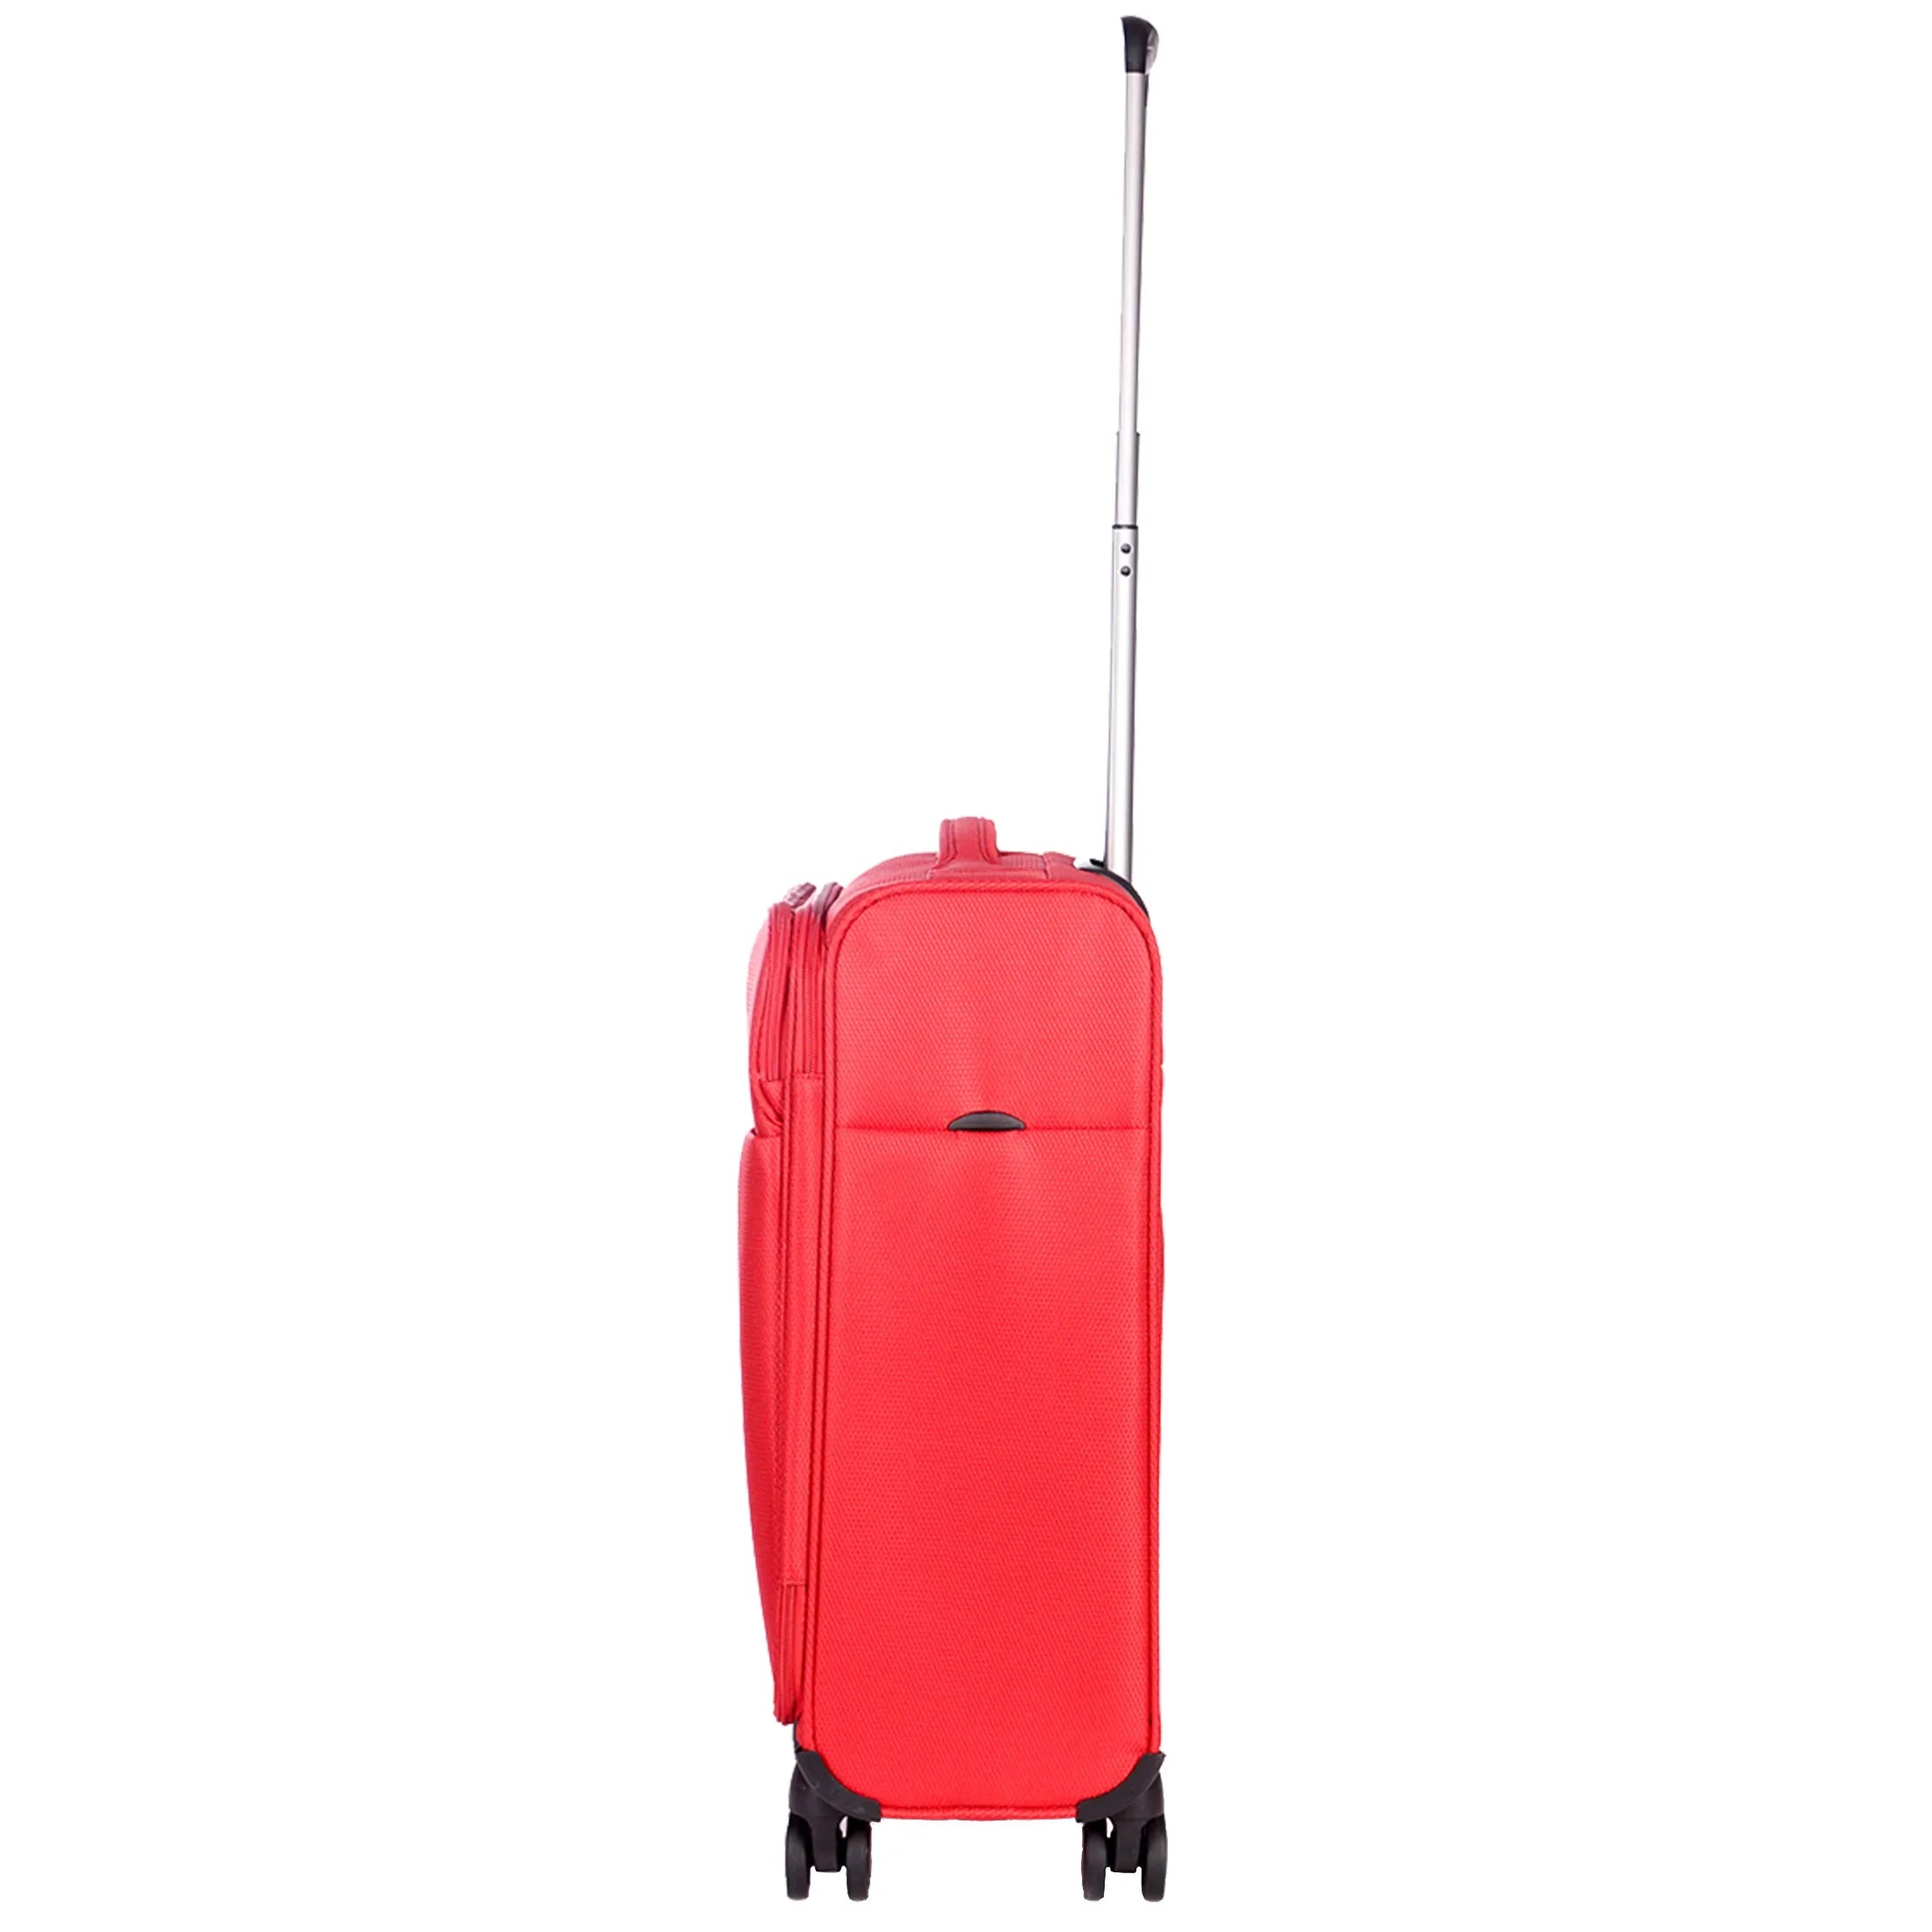 Stratic Light + 4-Rollen Kabinentrolley 55 cm - Red